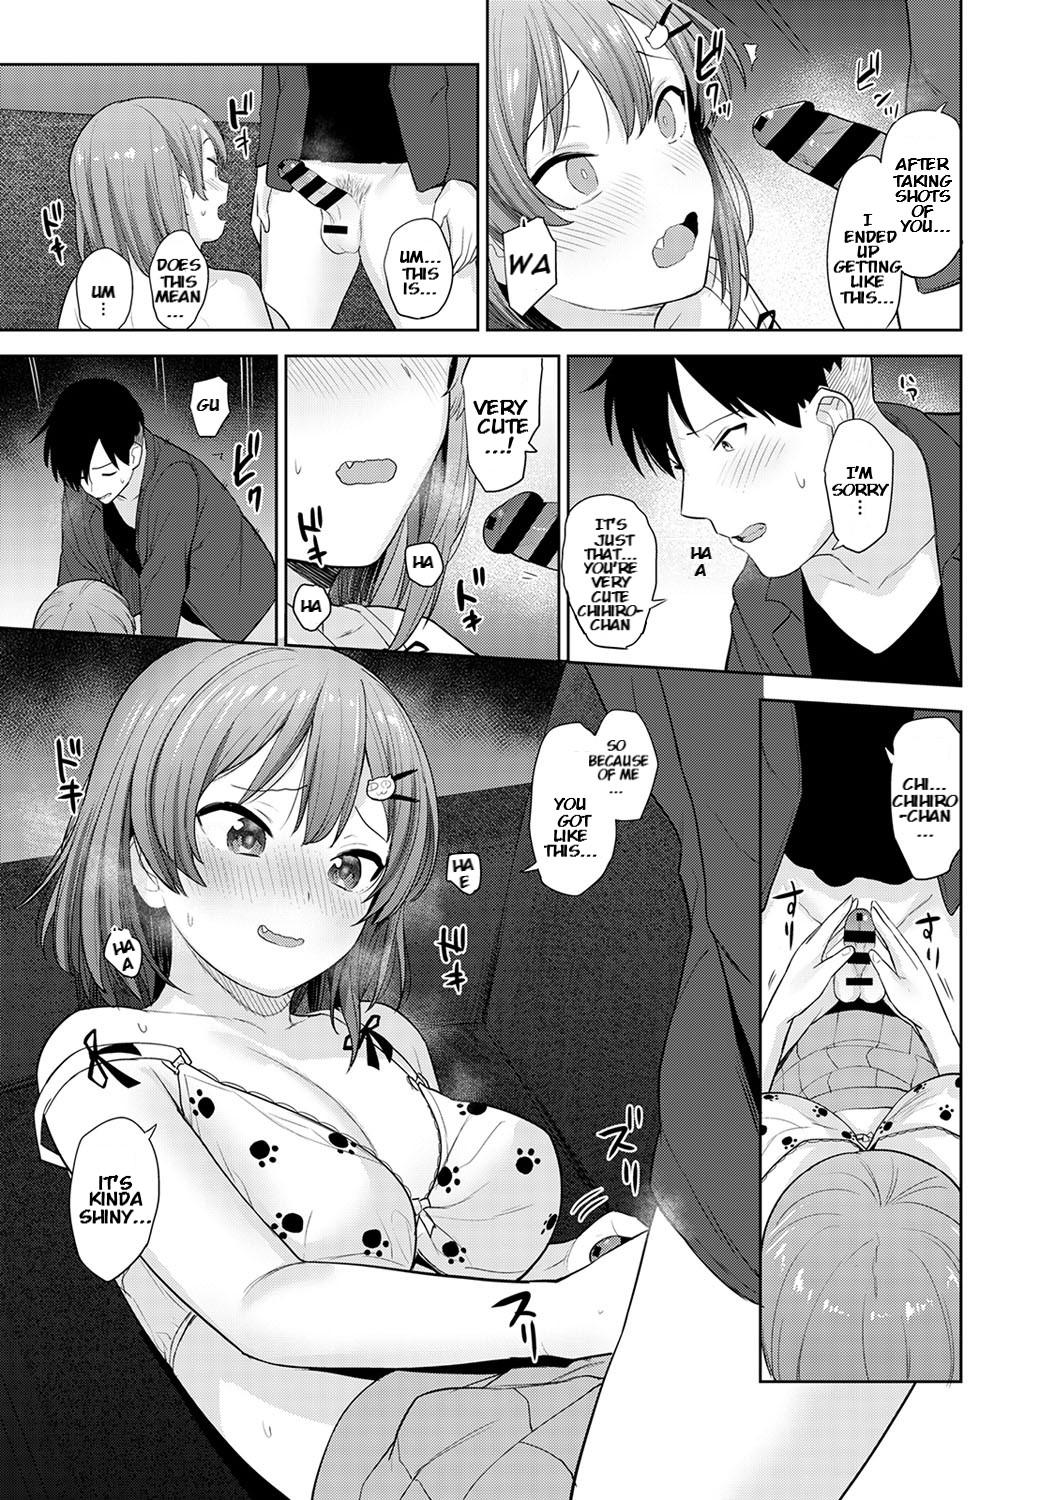 SotsuAl Cameraman to Shite Ichinenkan Joshikou no Event e Doukou Suru Koto ni Natta Hanashi | A Story About How I Ended Up Being A Yearbook Camerman at an All Girls' School For A Year Ch. 1 13